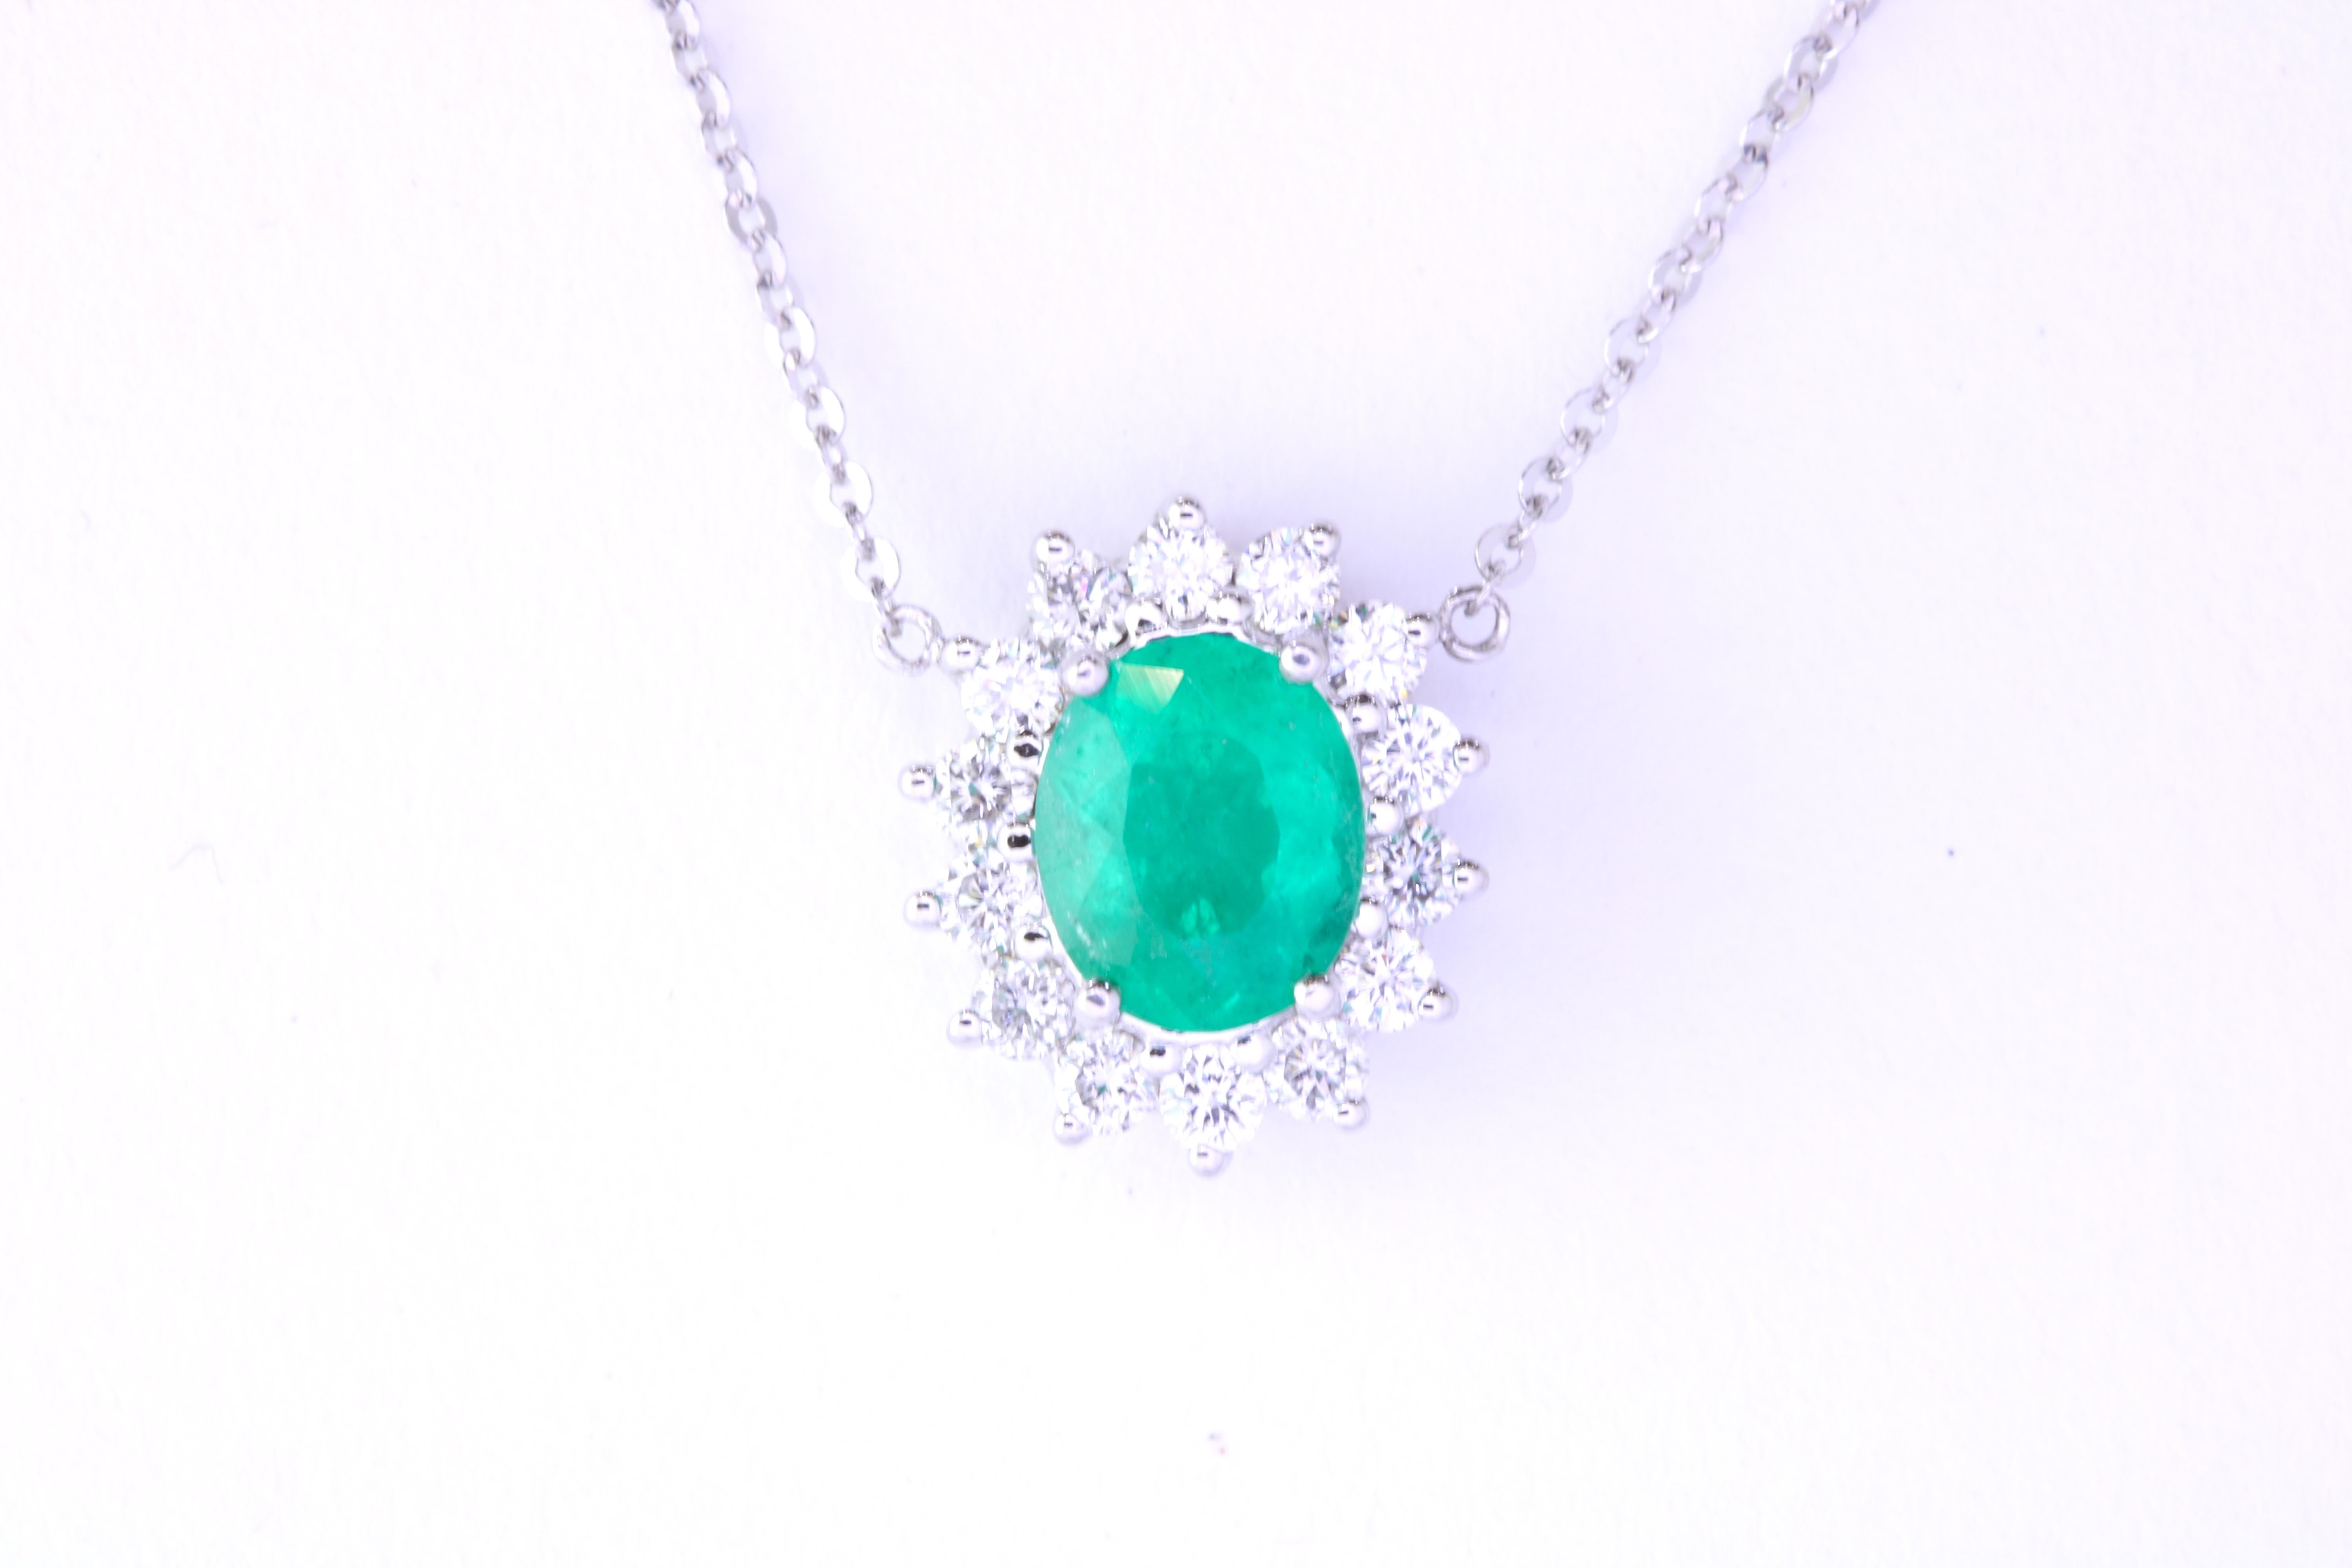 Add a pop of color to your jewelry collection with this 1.02 Carat Emerald necklace. Circled in 14 sparkling White Diamonds, this pendant is suspended by an 18-inch chain.  

Material: 14k White Gold 
Stone Details: 1 Oval Cut Emerald at 1.02